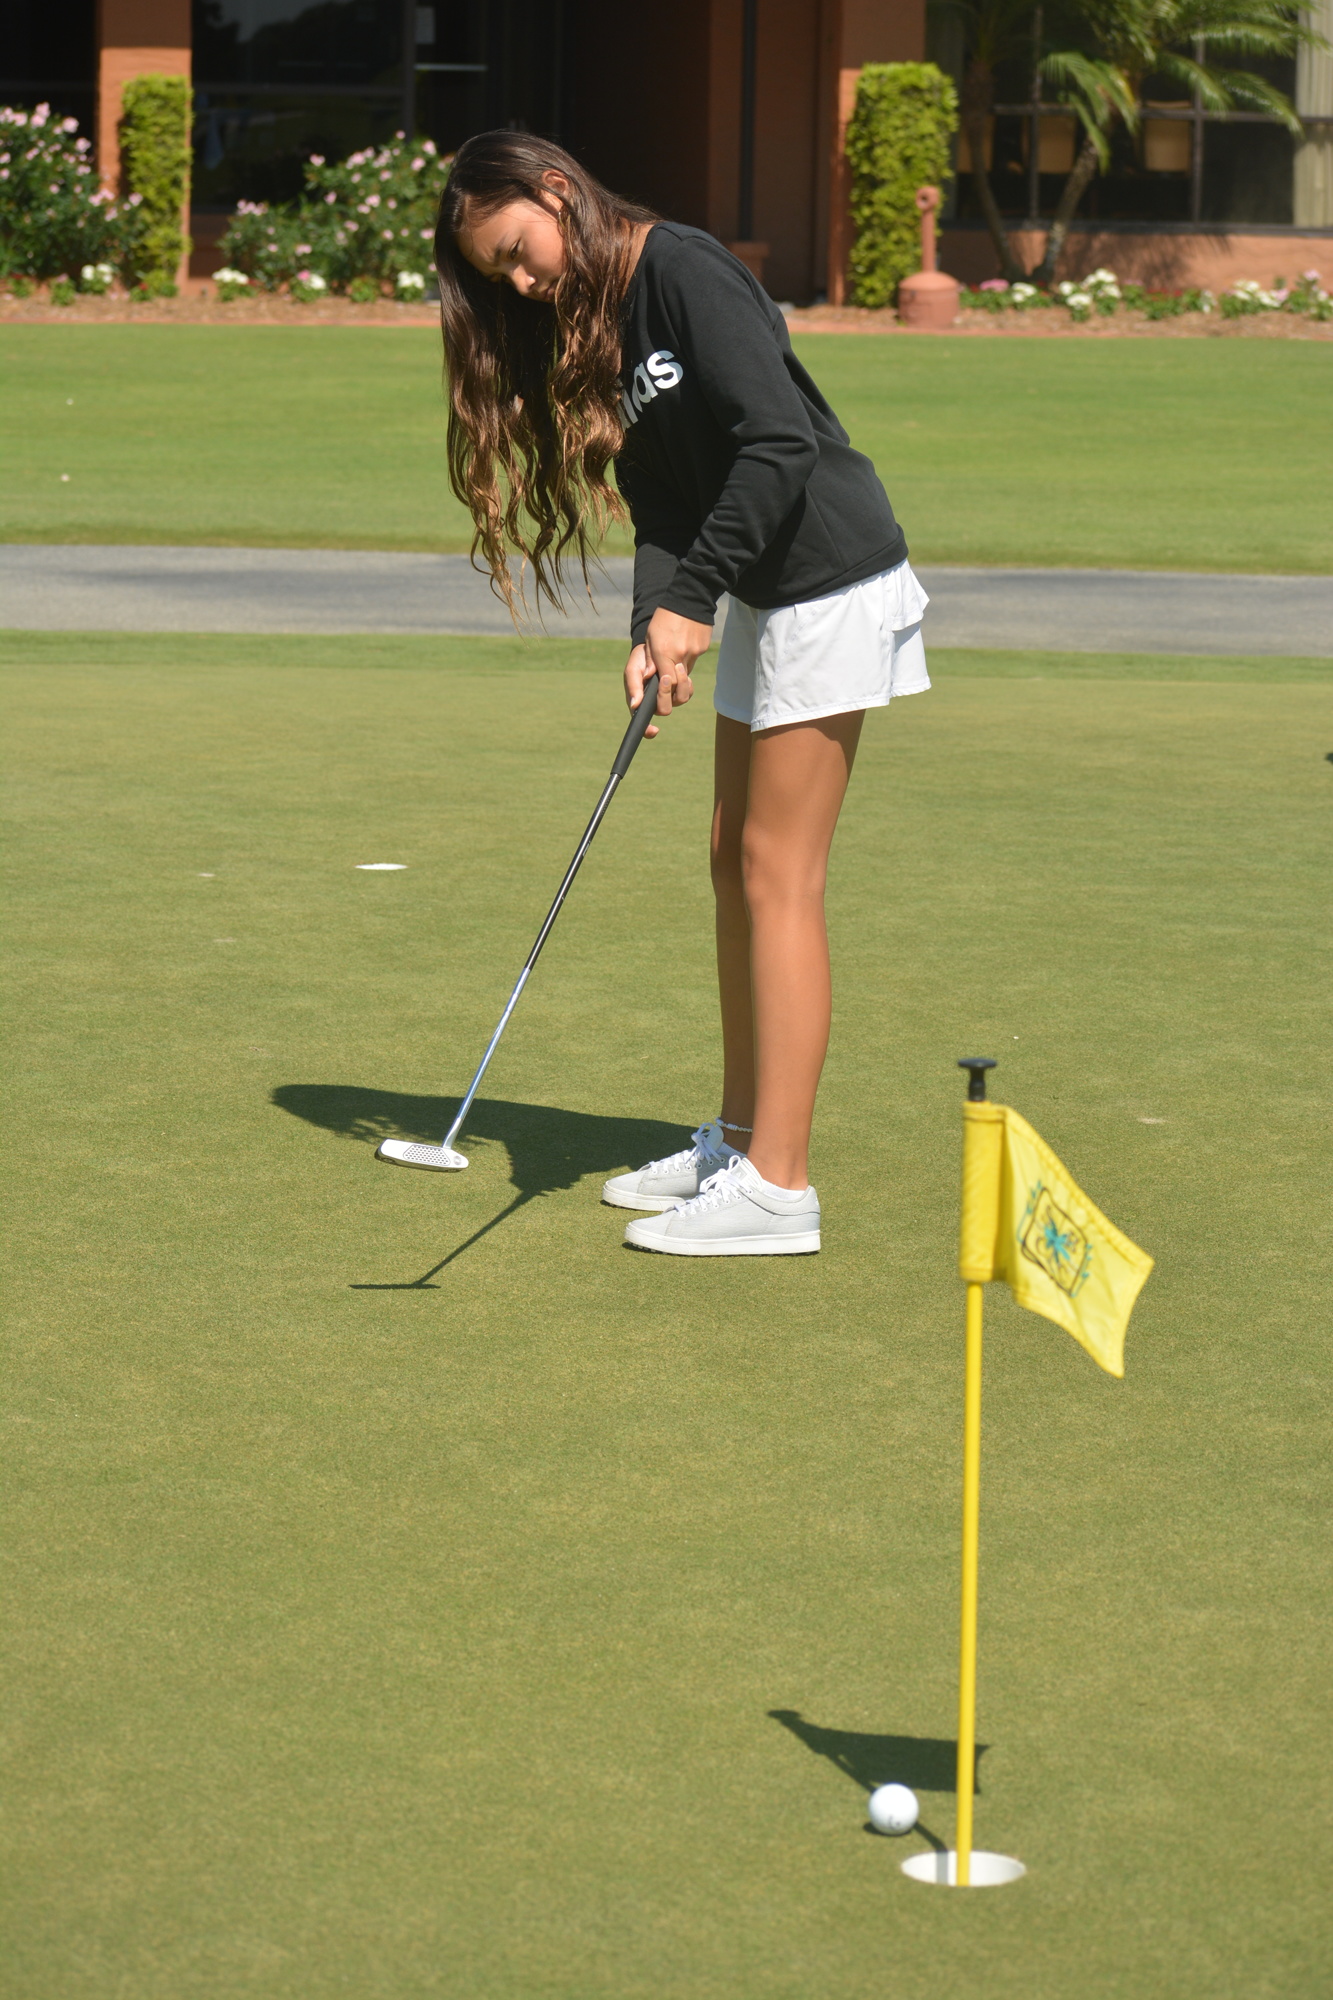 Alana Kutt, here practicing her putting, can advance to play at the Masters if she wins the regional tournament Sept. 28 at TPC Sawgrass.